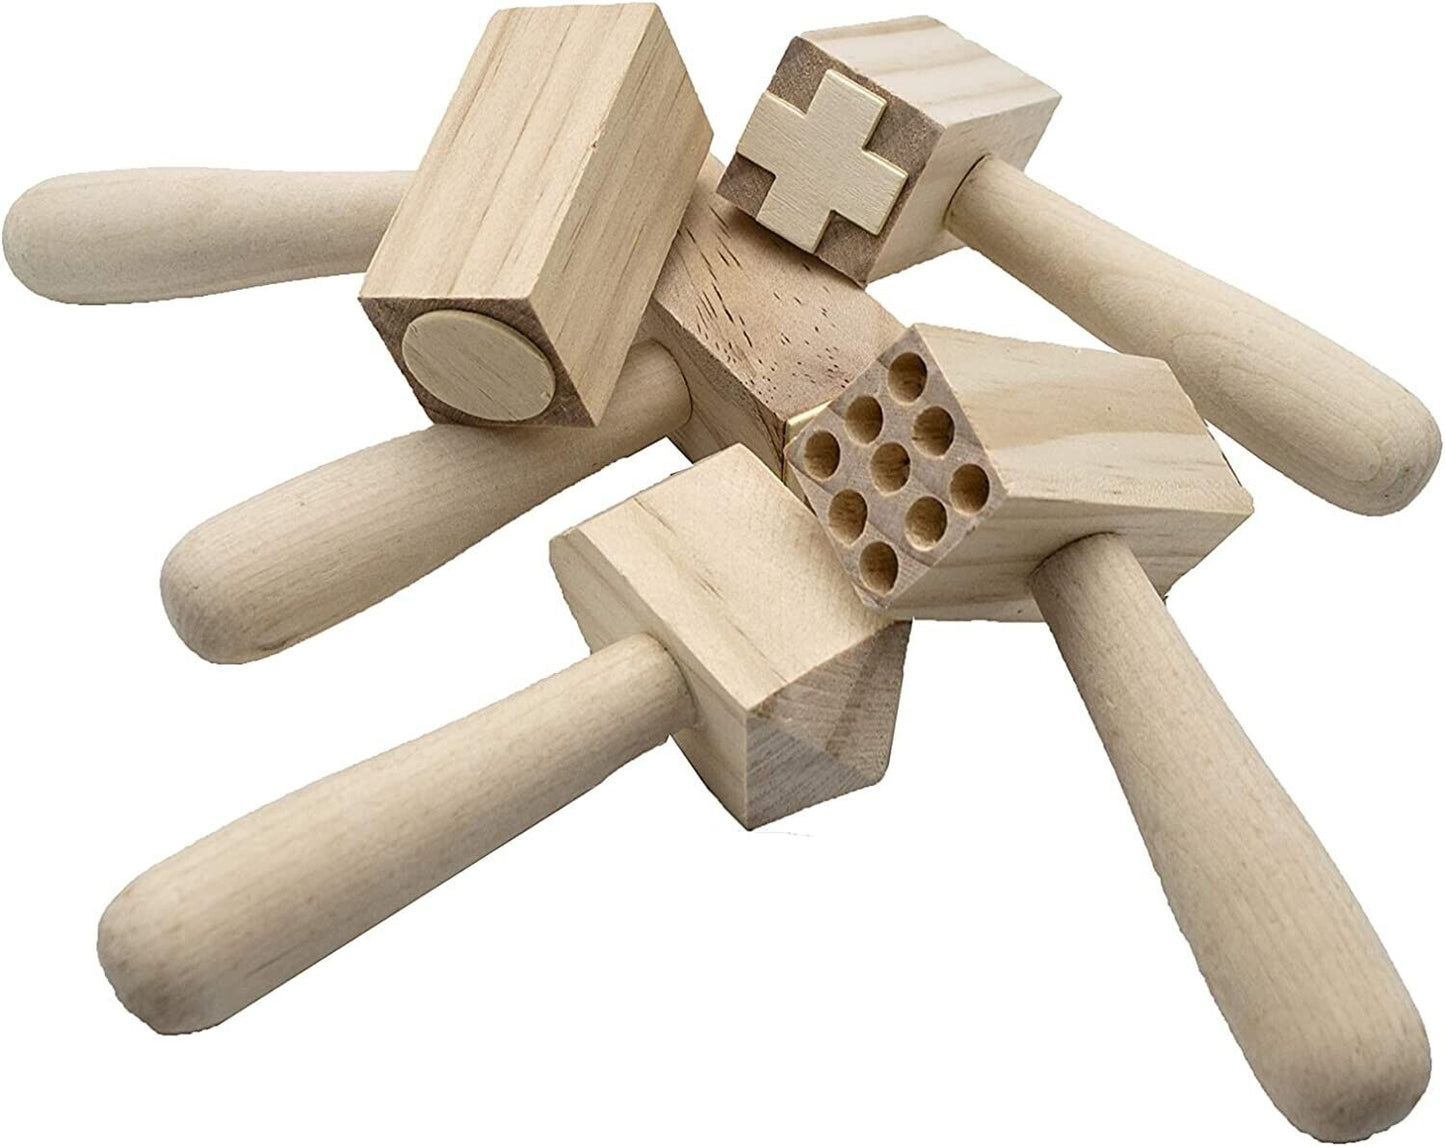 Wooden Pattern Hammers (Set of 5) | Learning and Exploring Through Play